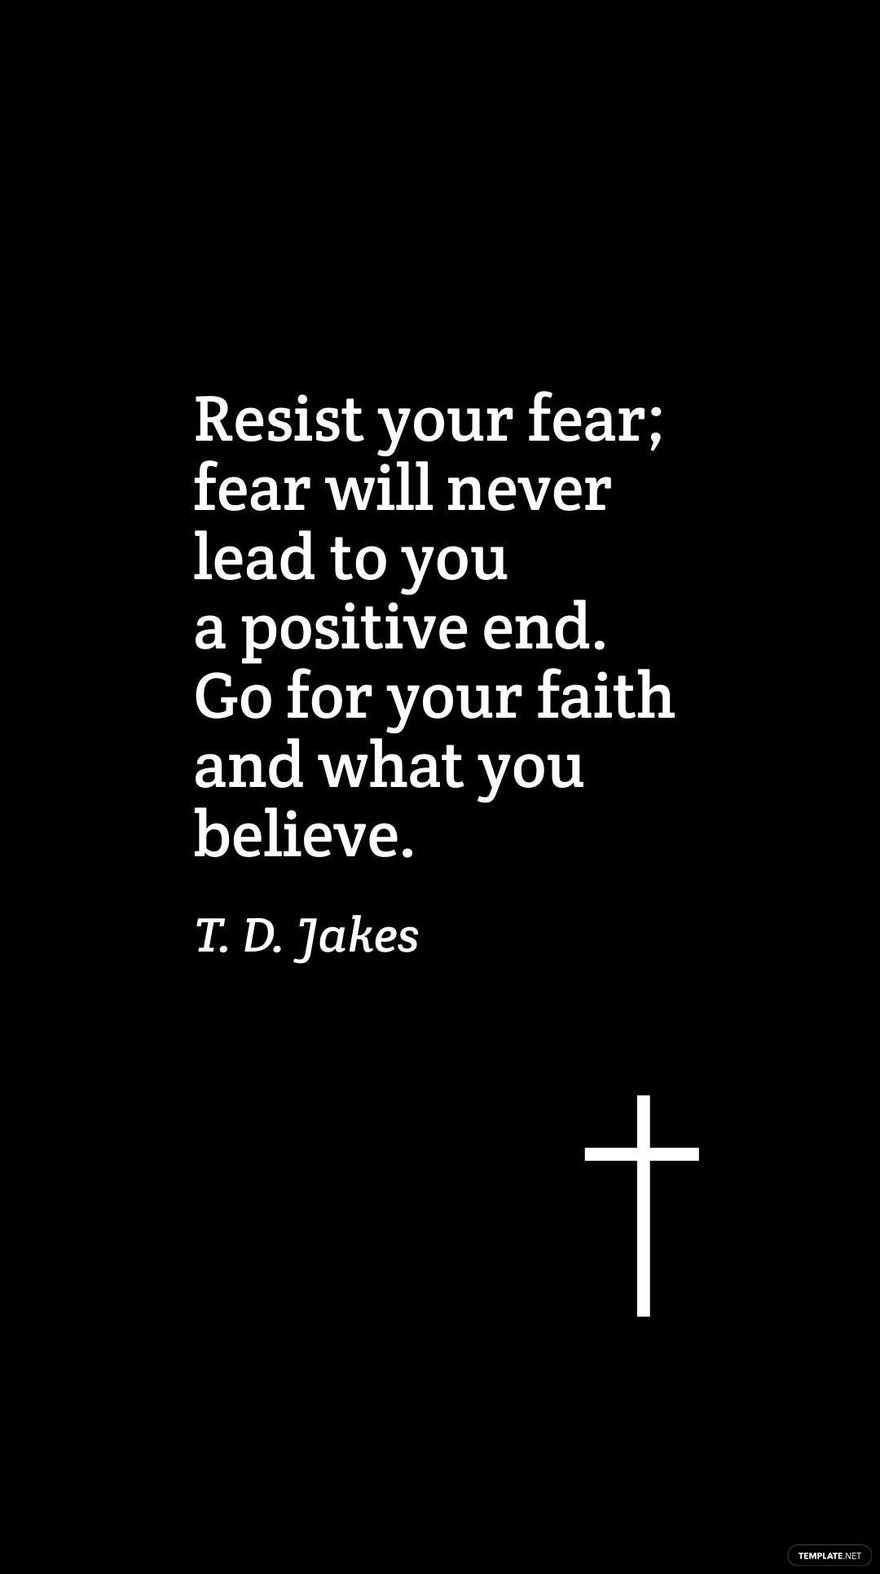 T. D. Jakes - Resist your fear; fear will never lead to you a positive end. Go for your faith and what you believe.